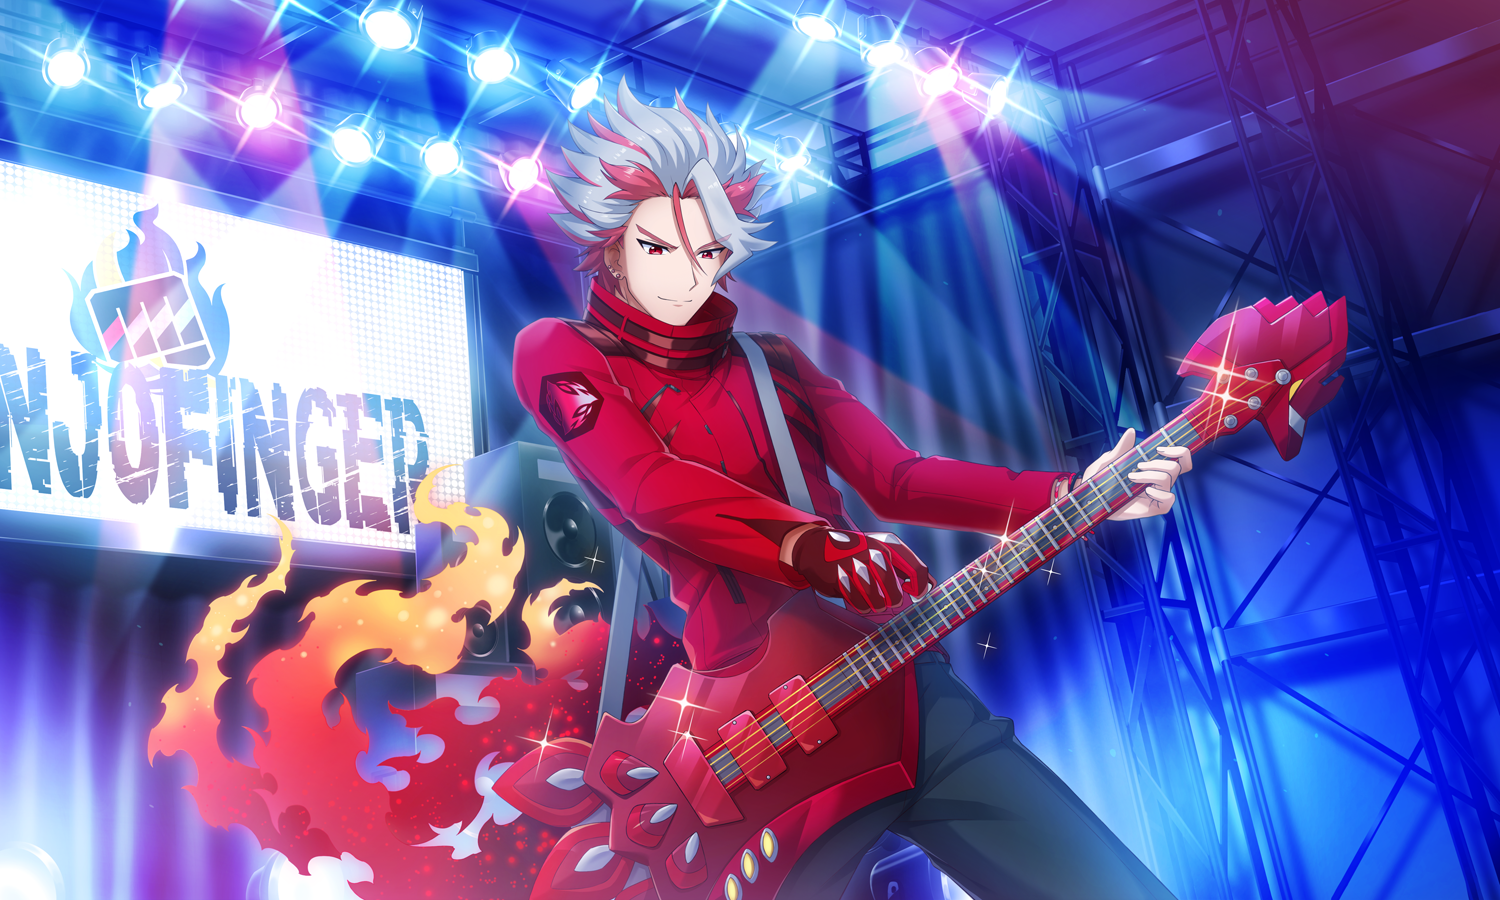 Live Musical「SHOW BY ROCK!!」 ～THE FES II-thousand XVII～